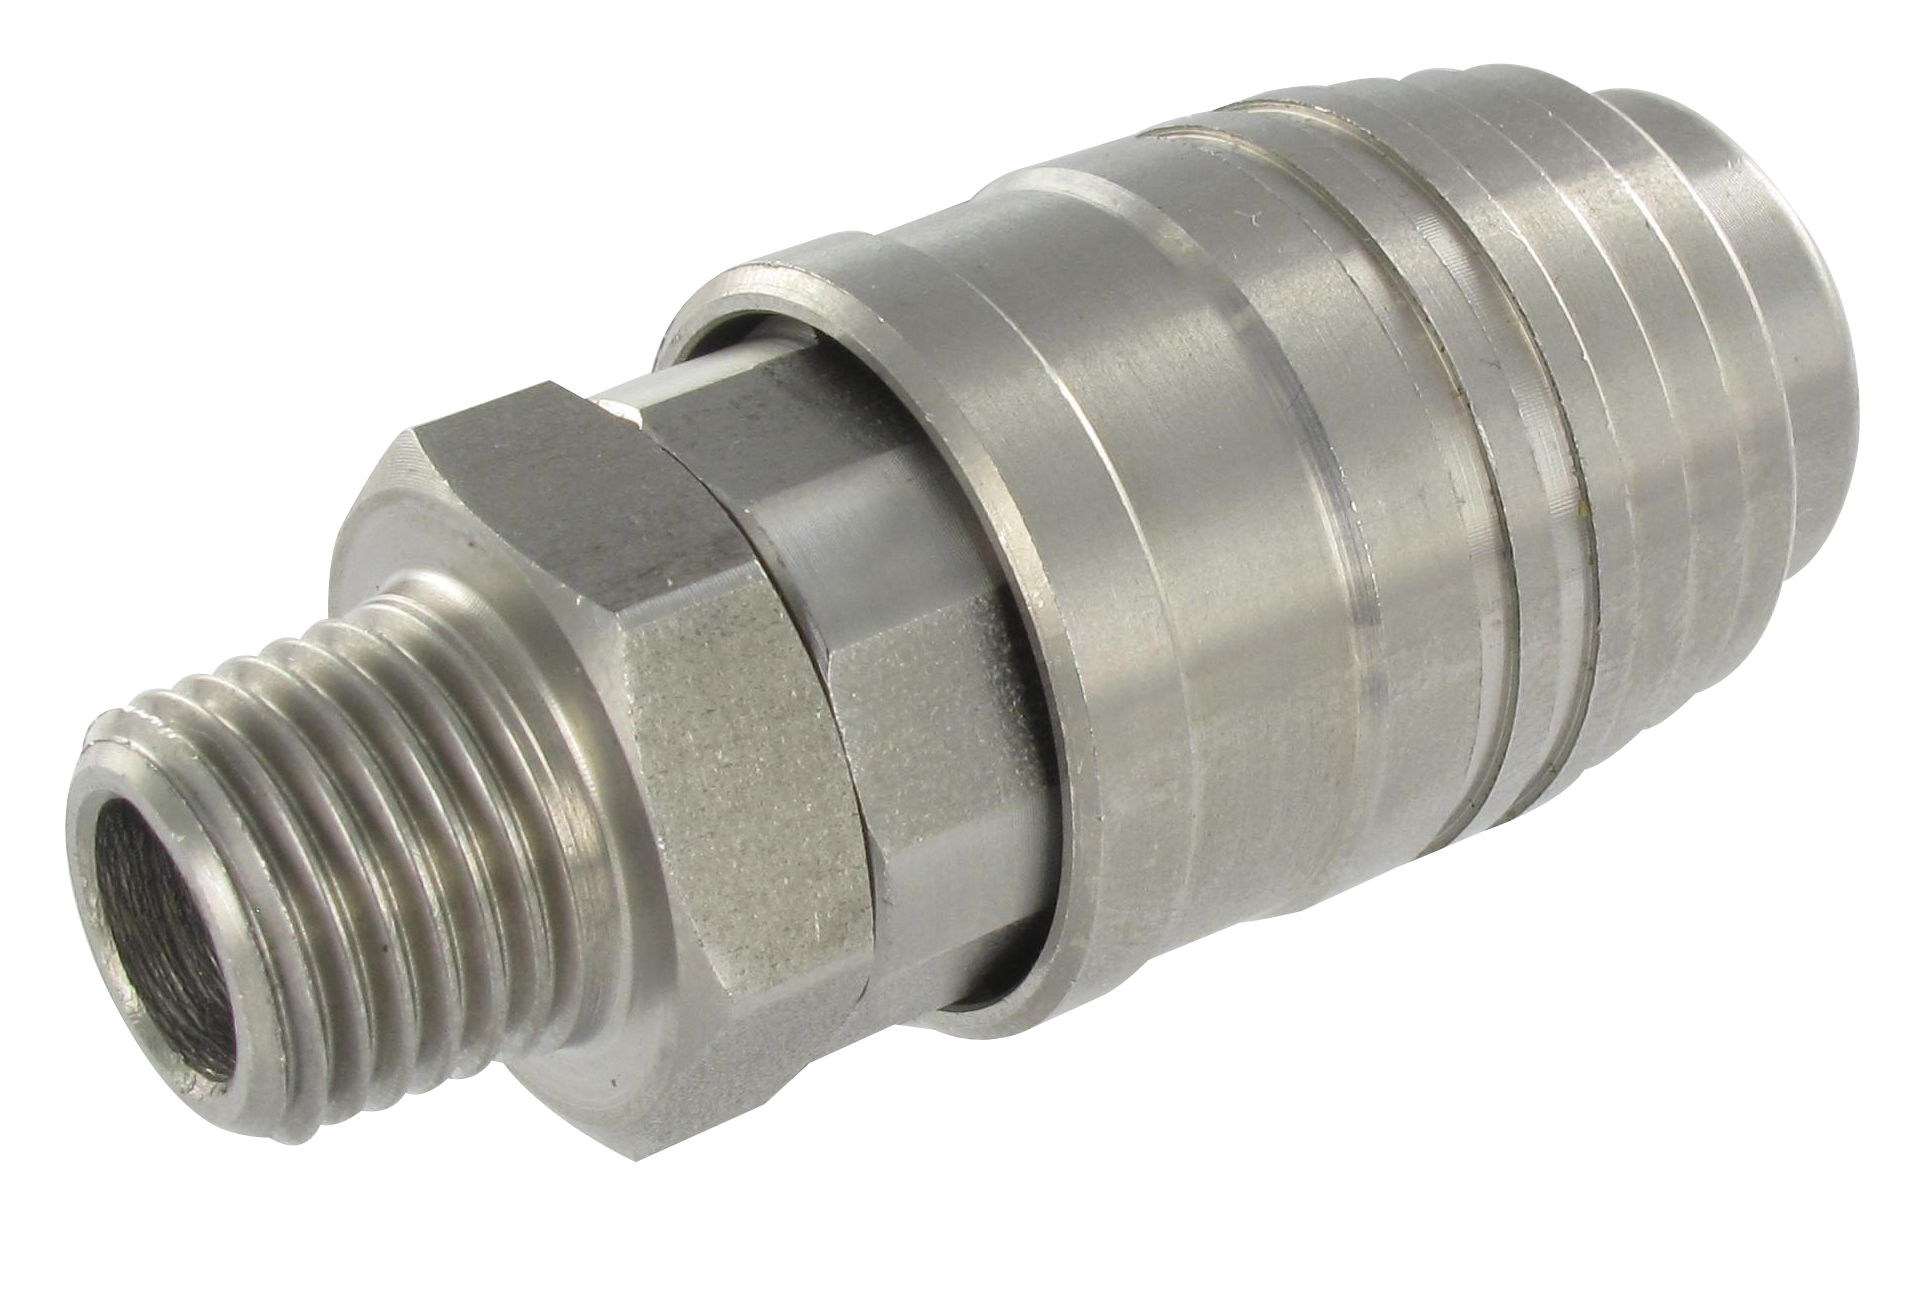 ISO-B male cylindrical couplings with 5.5 mm bore in stainless steel 303